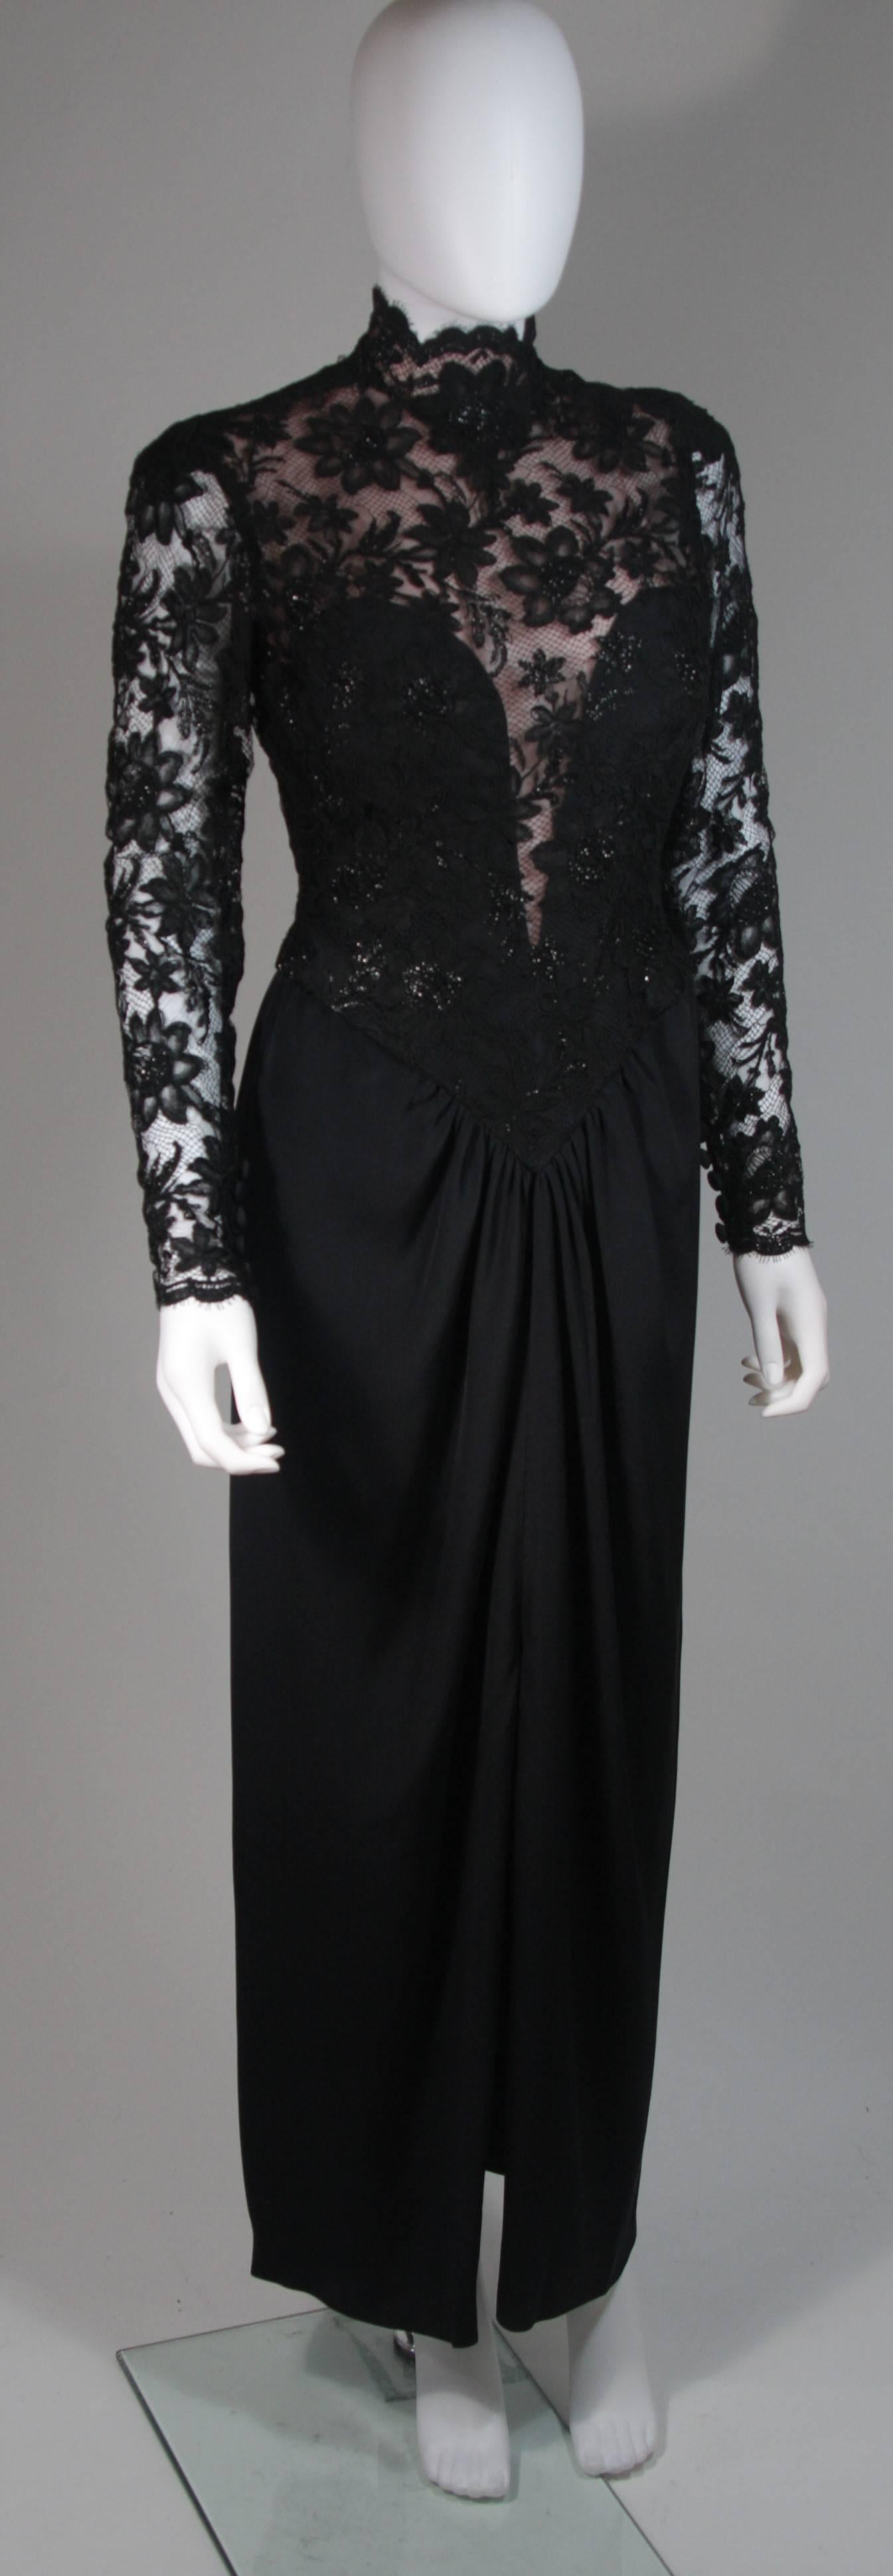 Women's BOB MACKIE Black Lace Gown with Draped Jersey Size Small